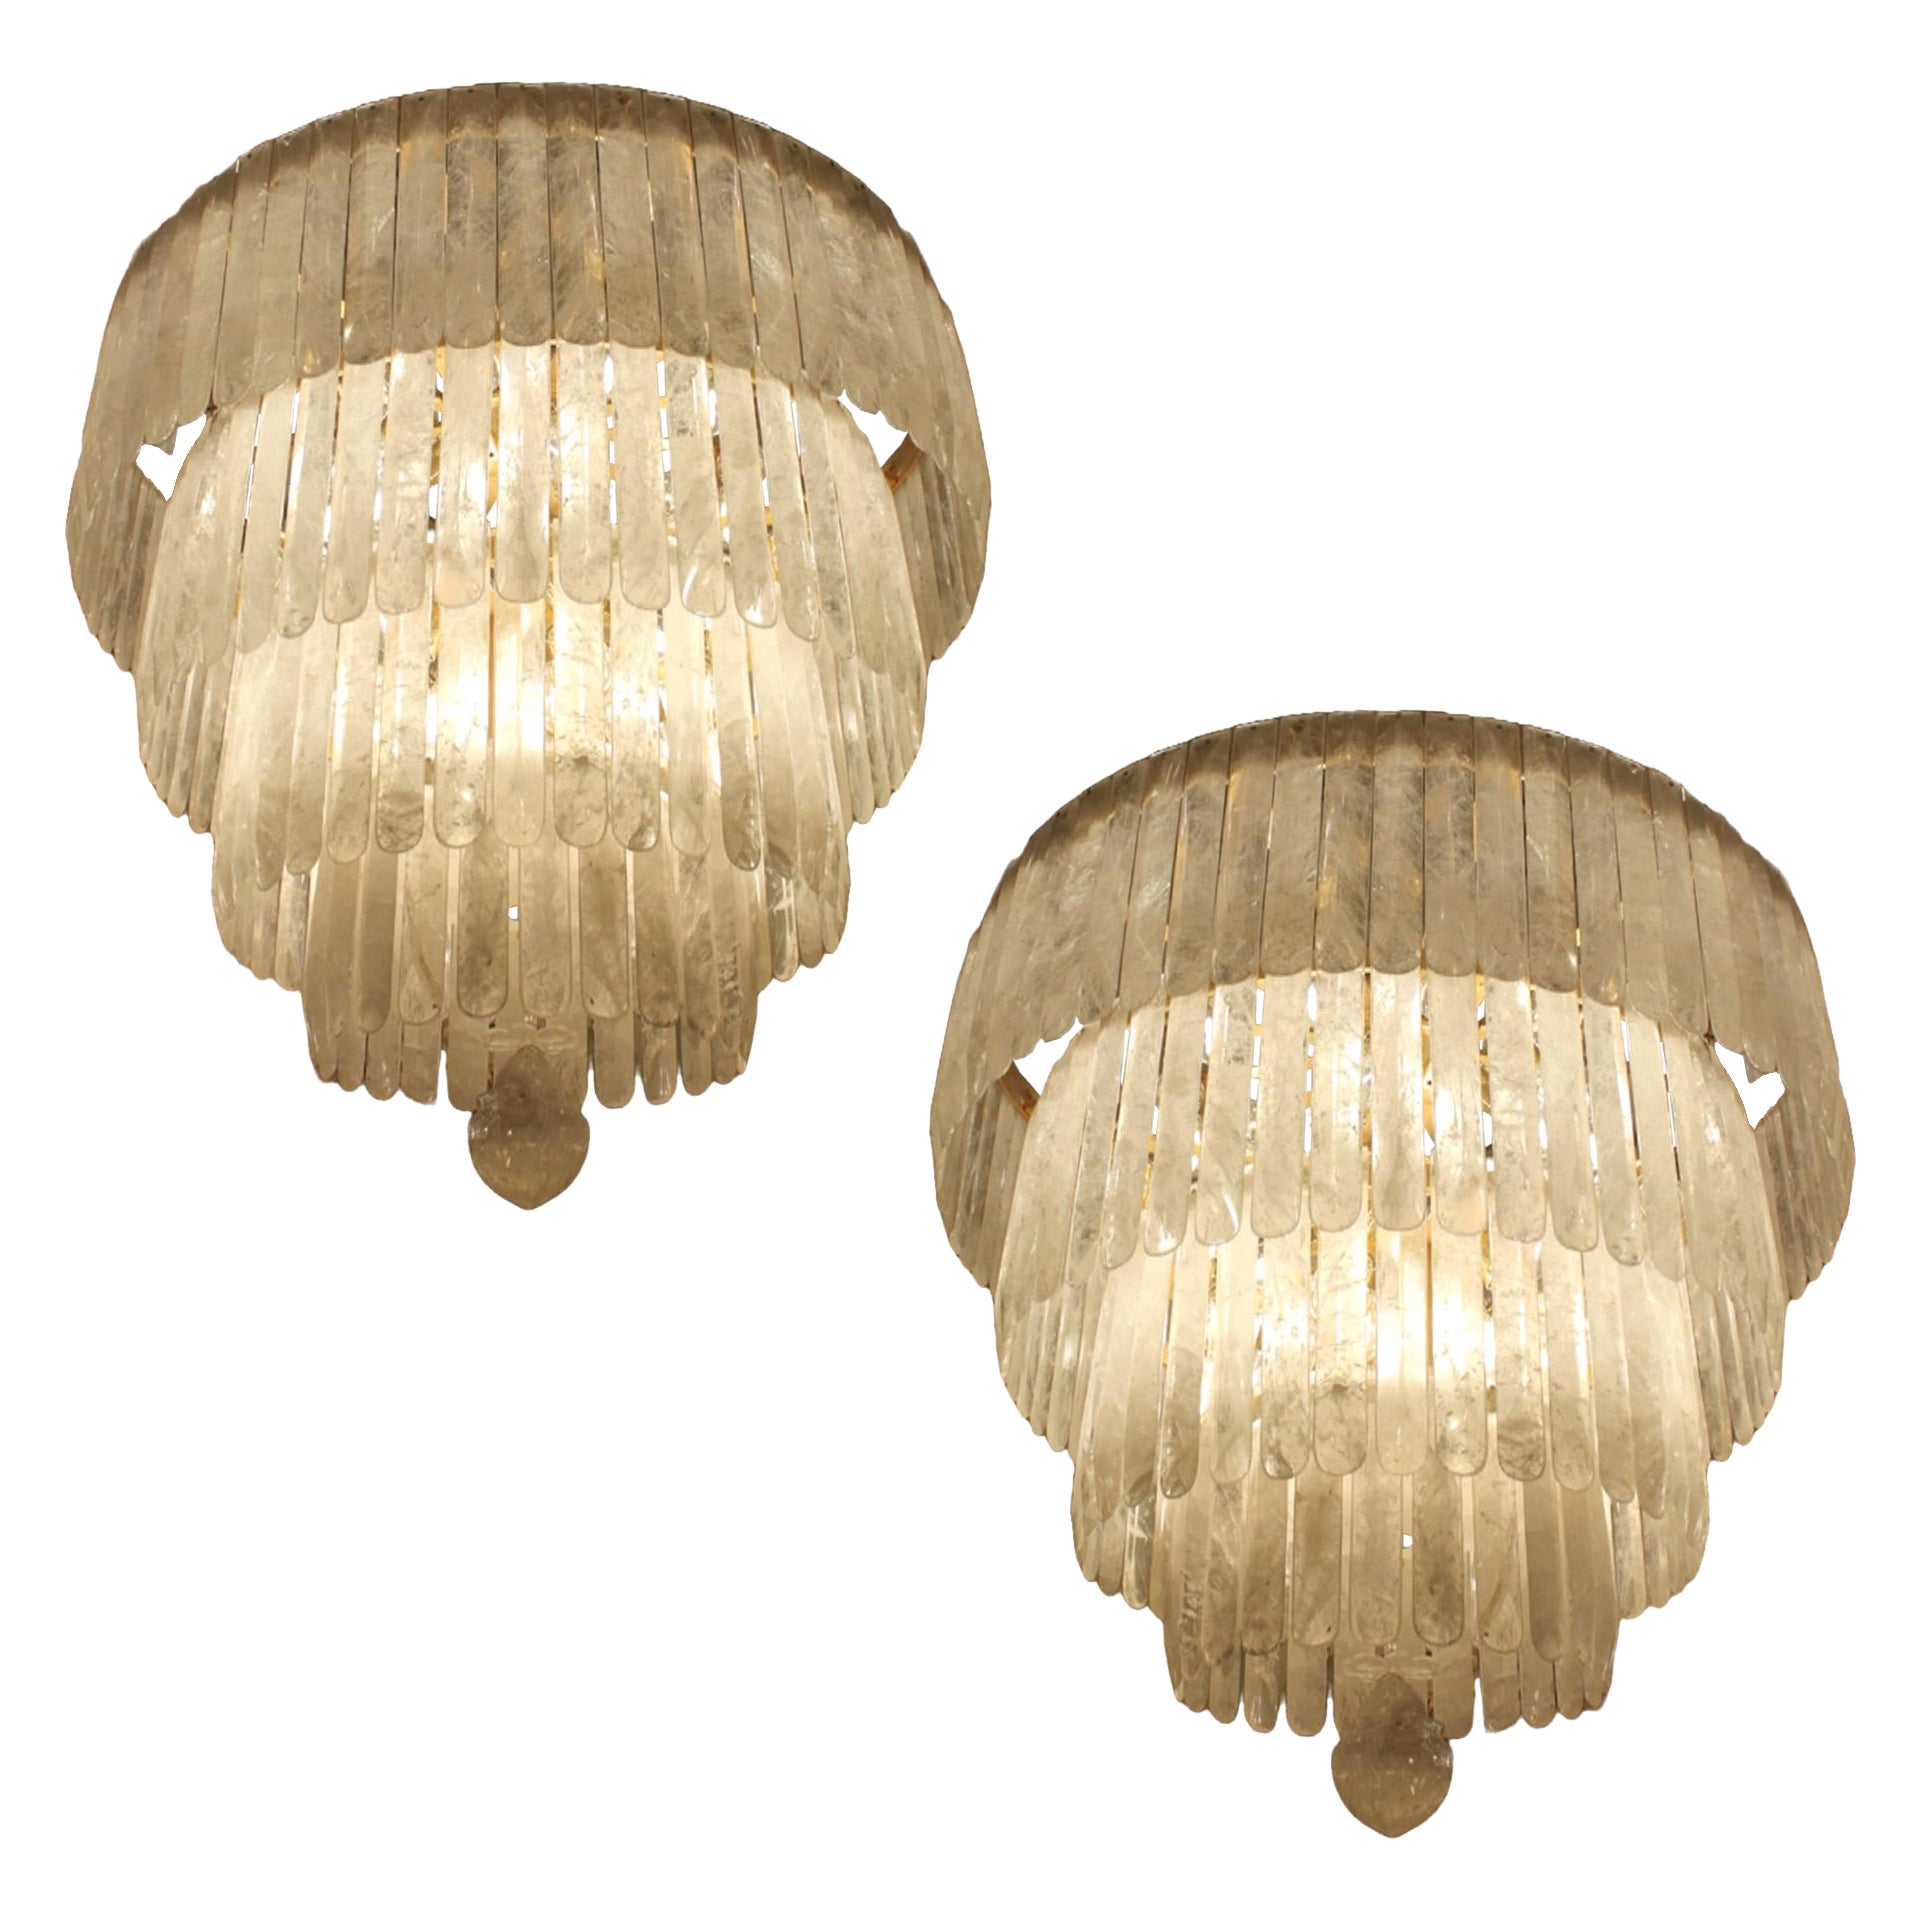  Uniqe exceptional pair of rock crystal chandeliers